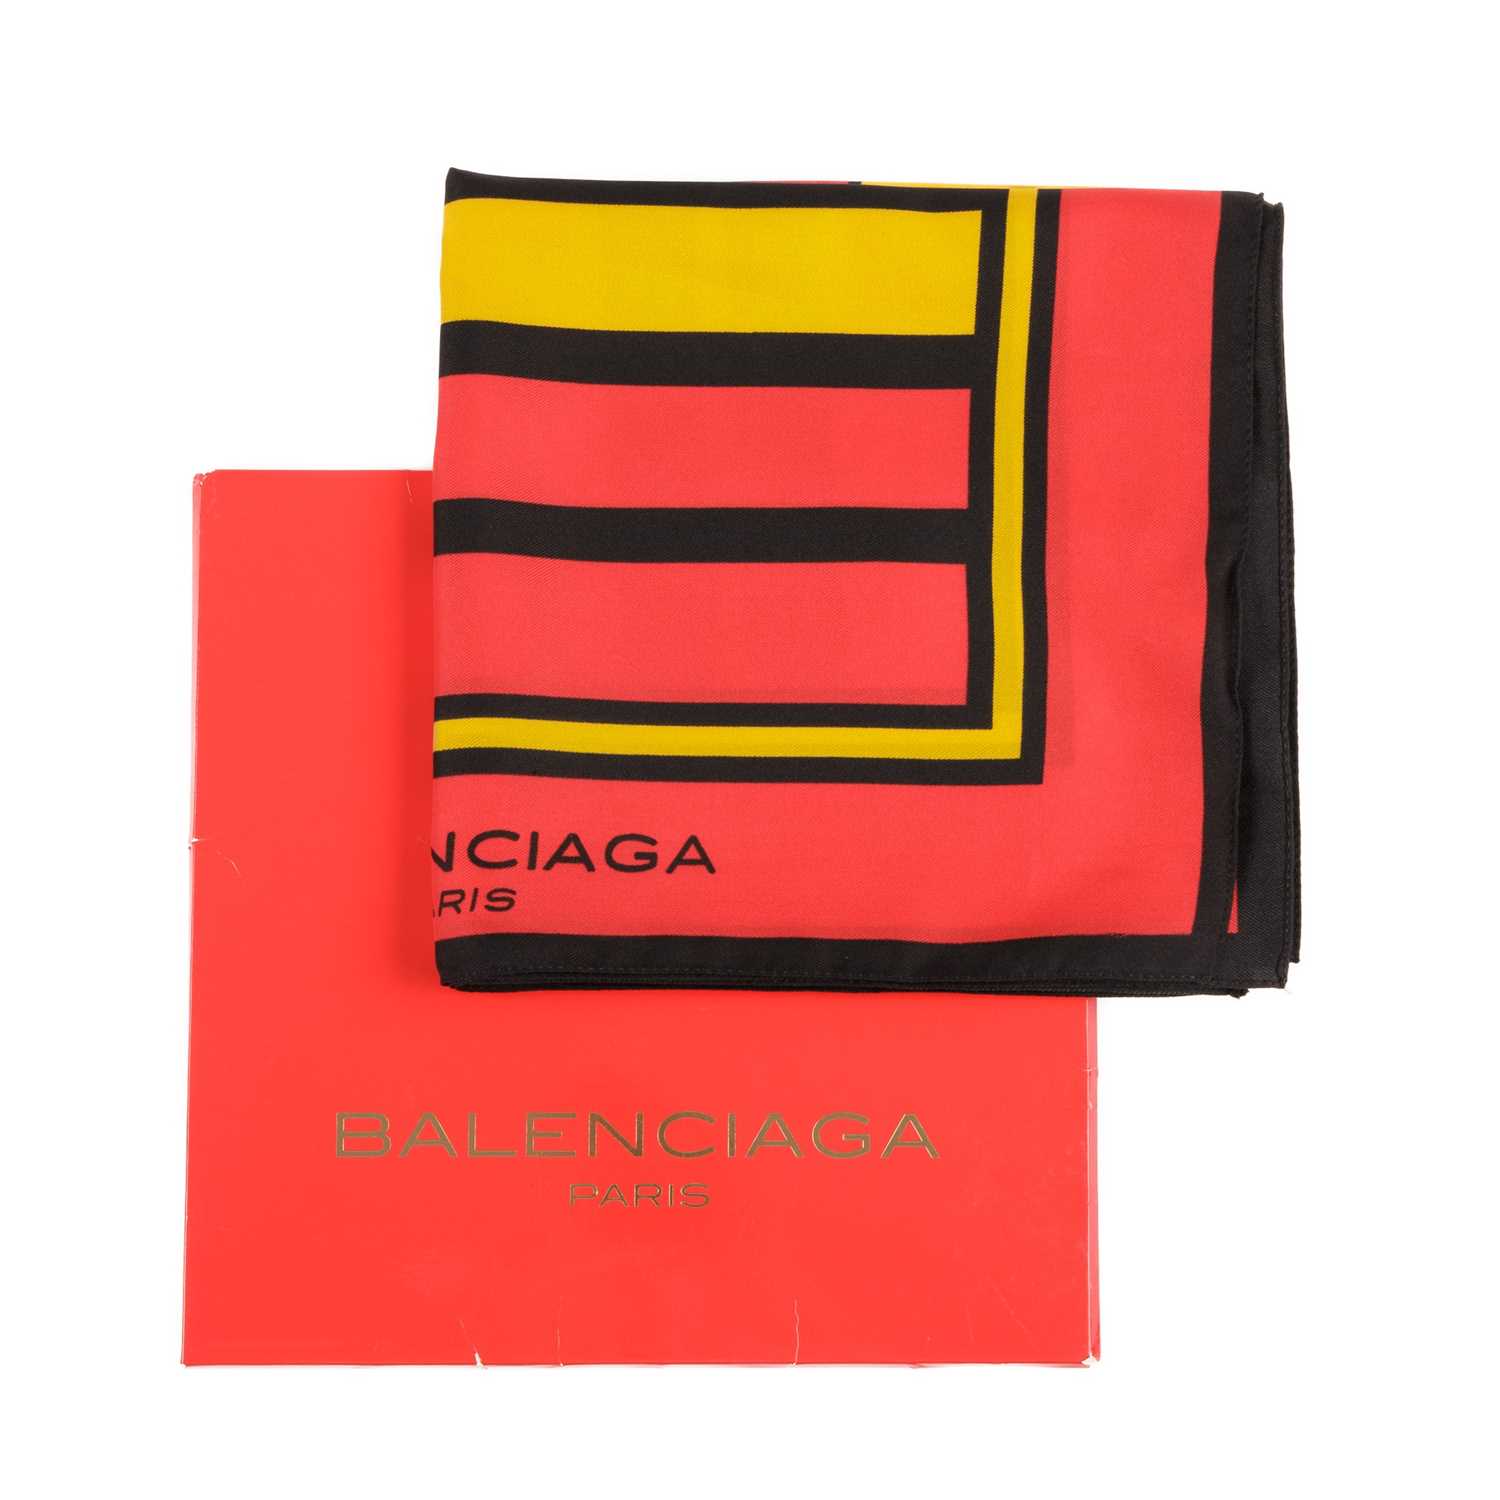 Balenciaga x Rumba, a vintage polyester scarf, designed for the perfume collaboration, featuring a - Image 3 of 3